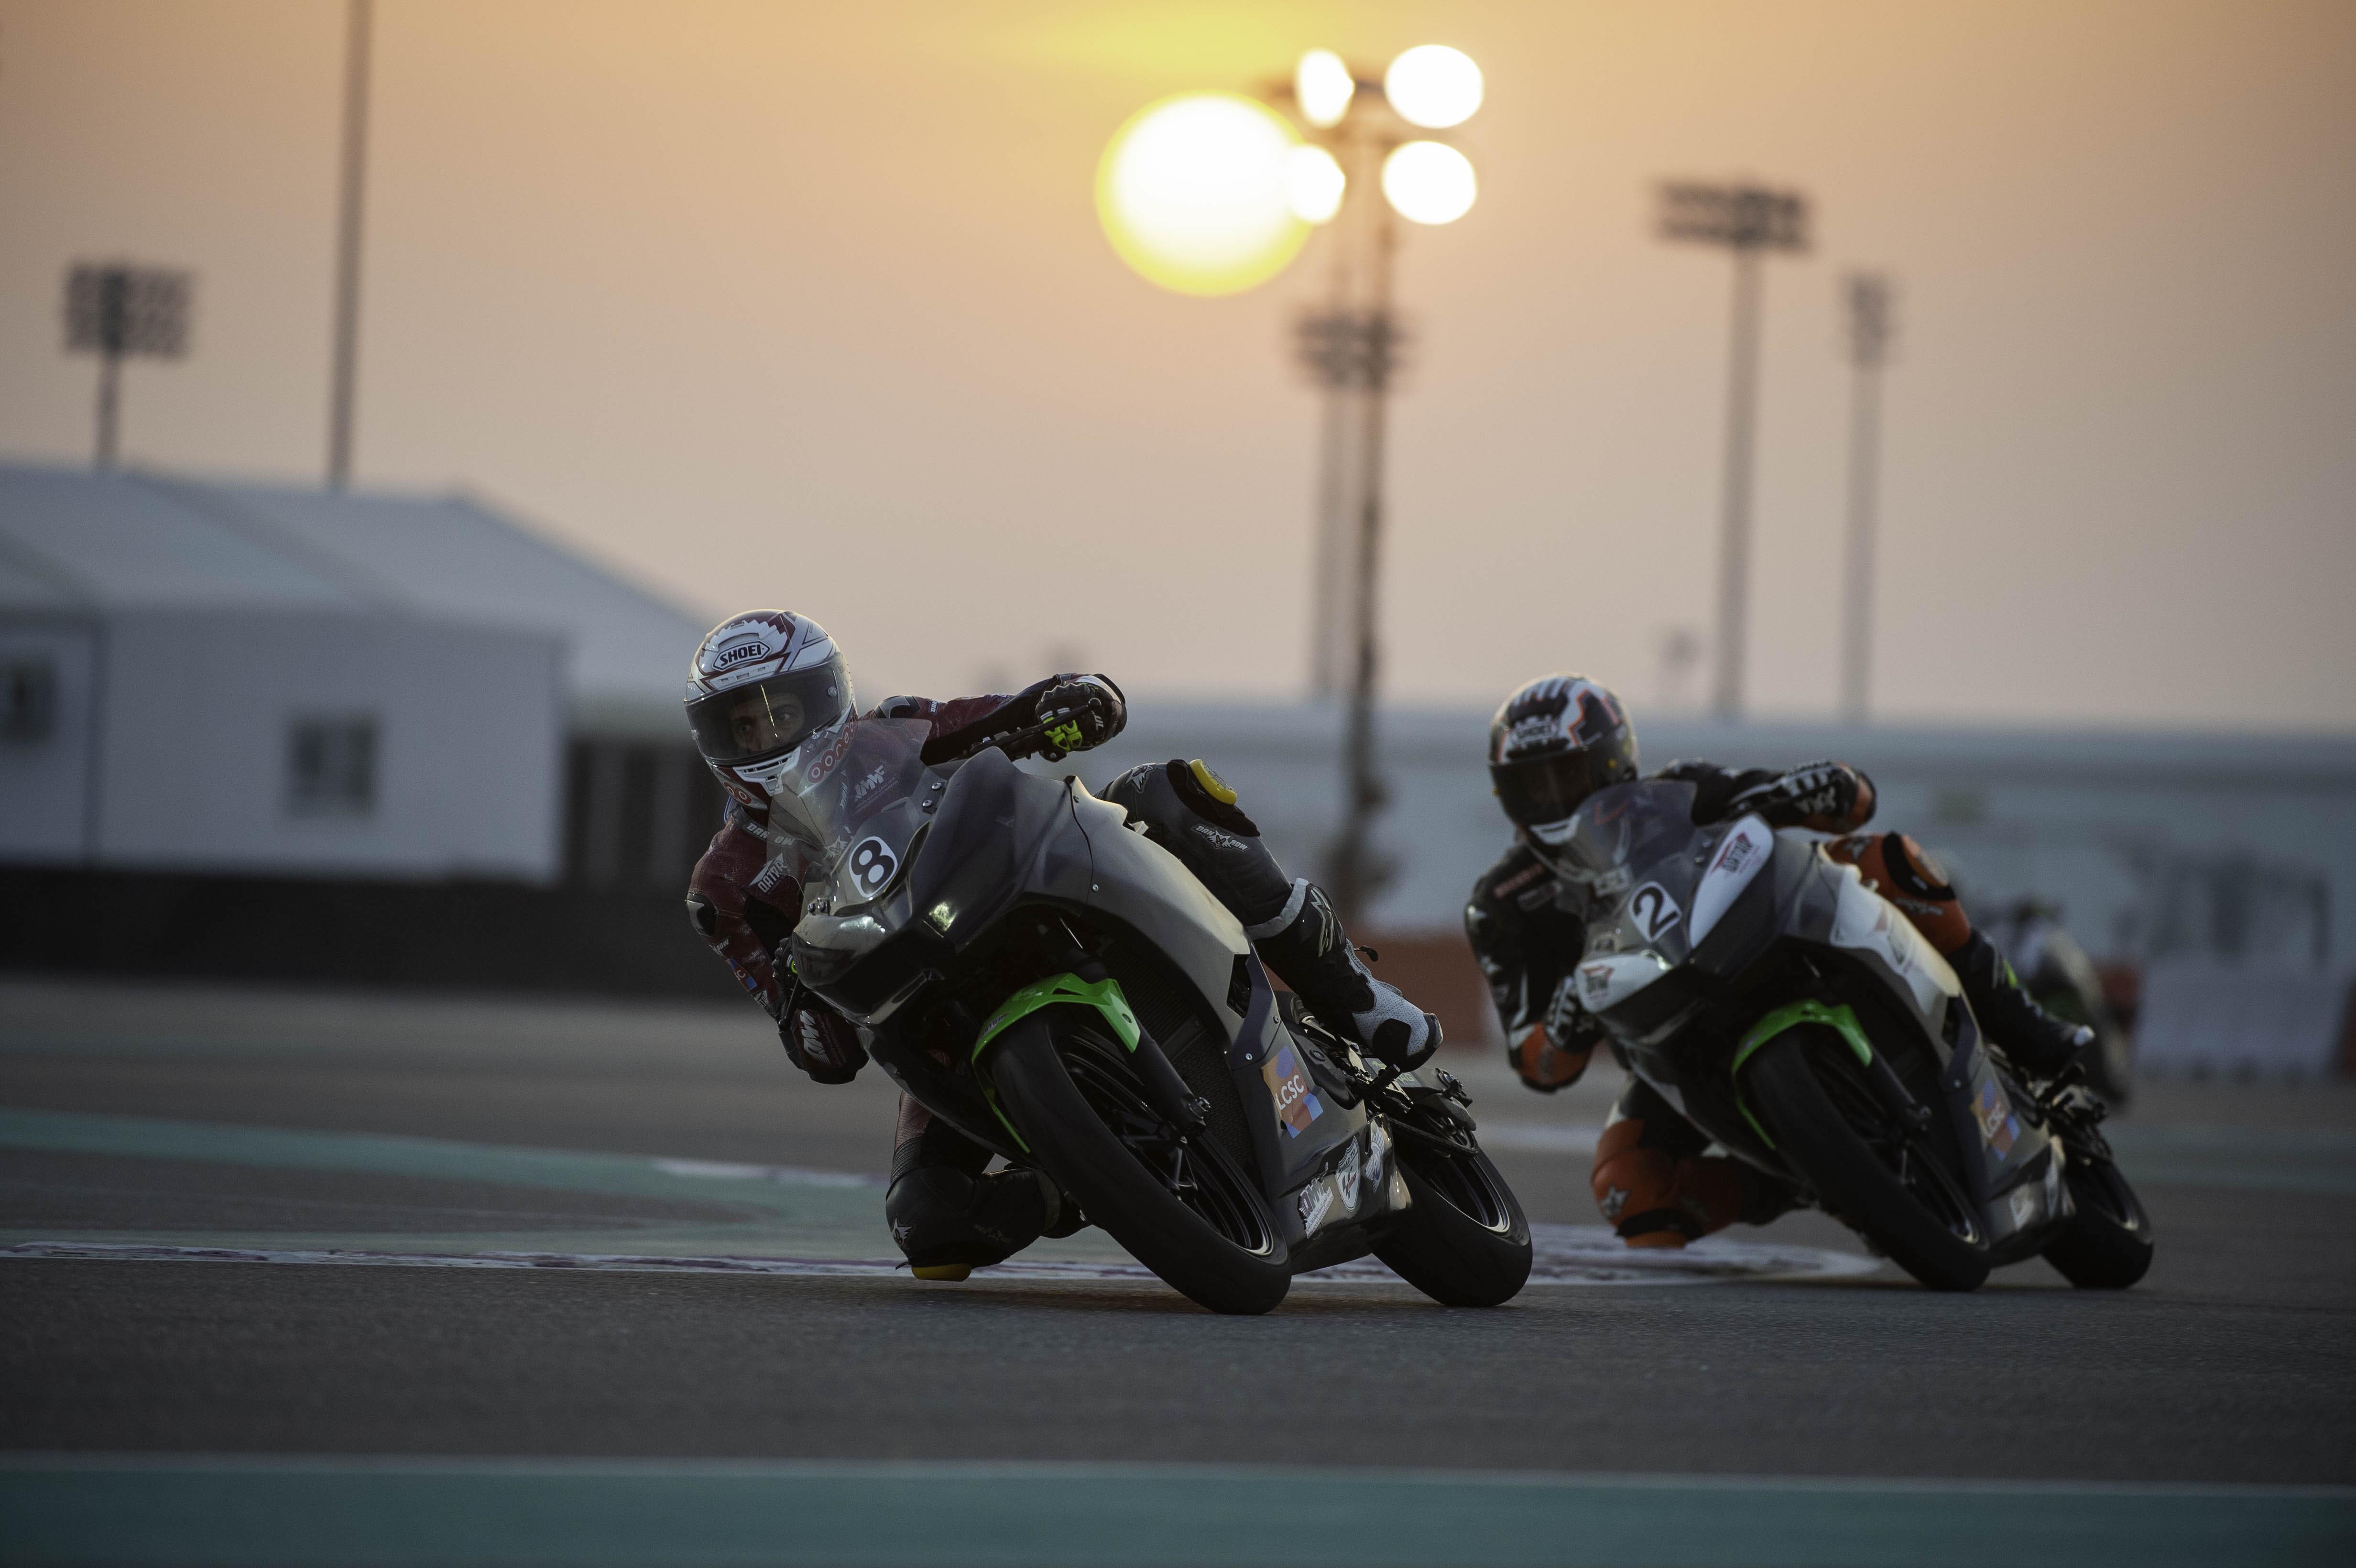 Losail Circuit Sports Club is ready to resume the motorsport activities